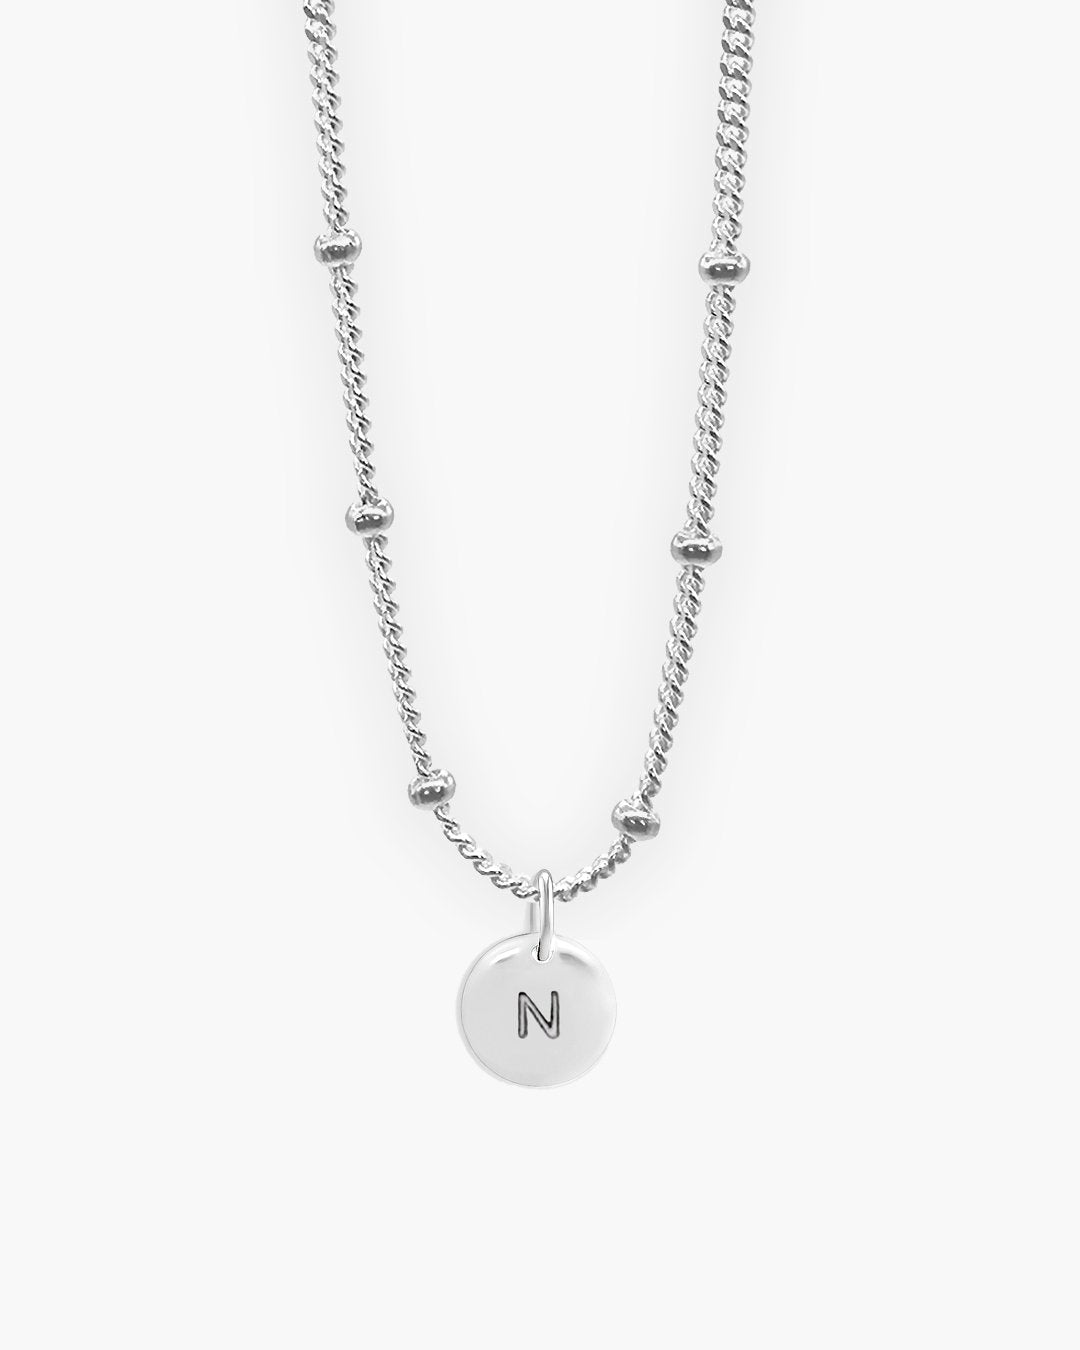 Silver Round Love Letter N Necklace